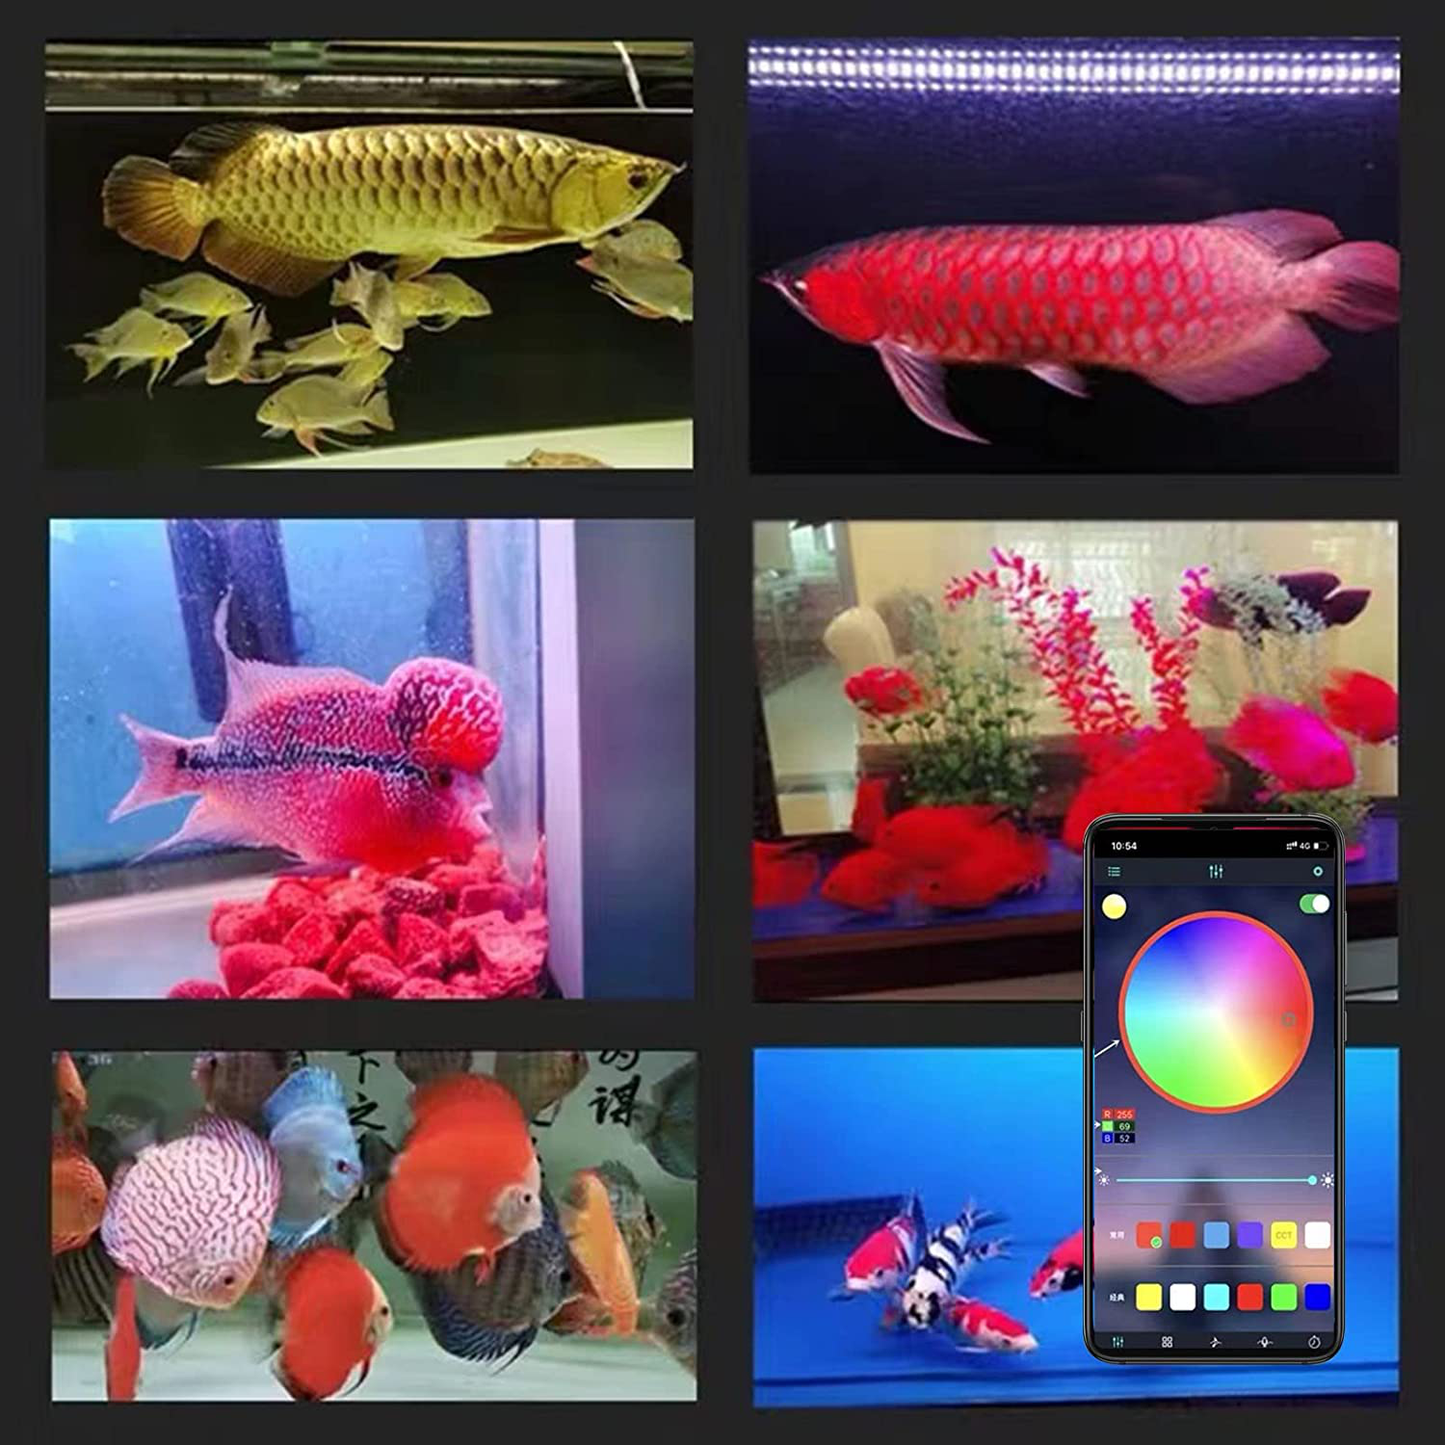 DOCEAN Aquarium Lighting Fish Tank Light with APP Control, RGB Color Changing, with Timer 15 Leds, 11 Inch/28Cm